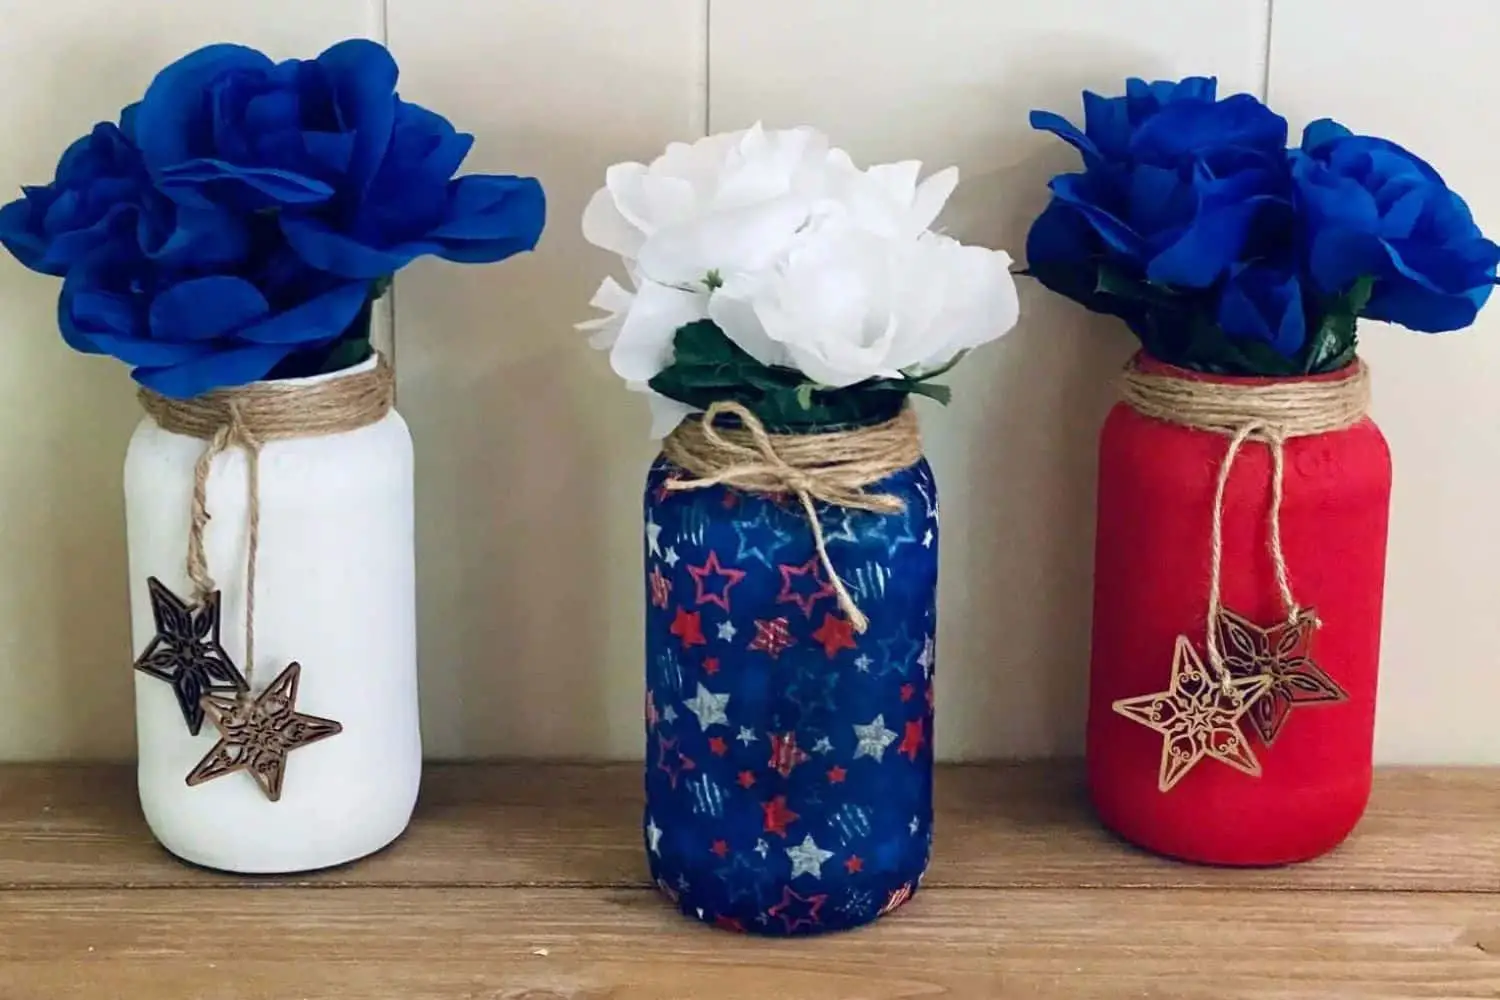 Unique Patriotic Mason Jar Crafts for the 4th of July Made From Dollar Tree Items